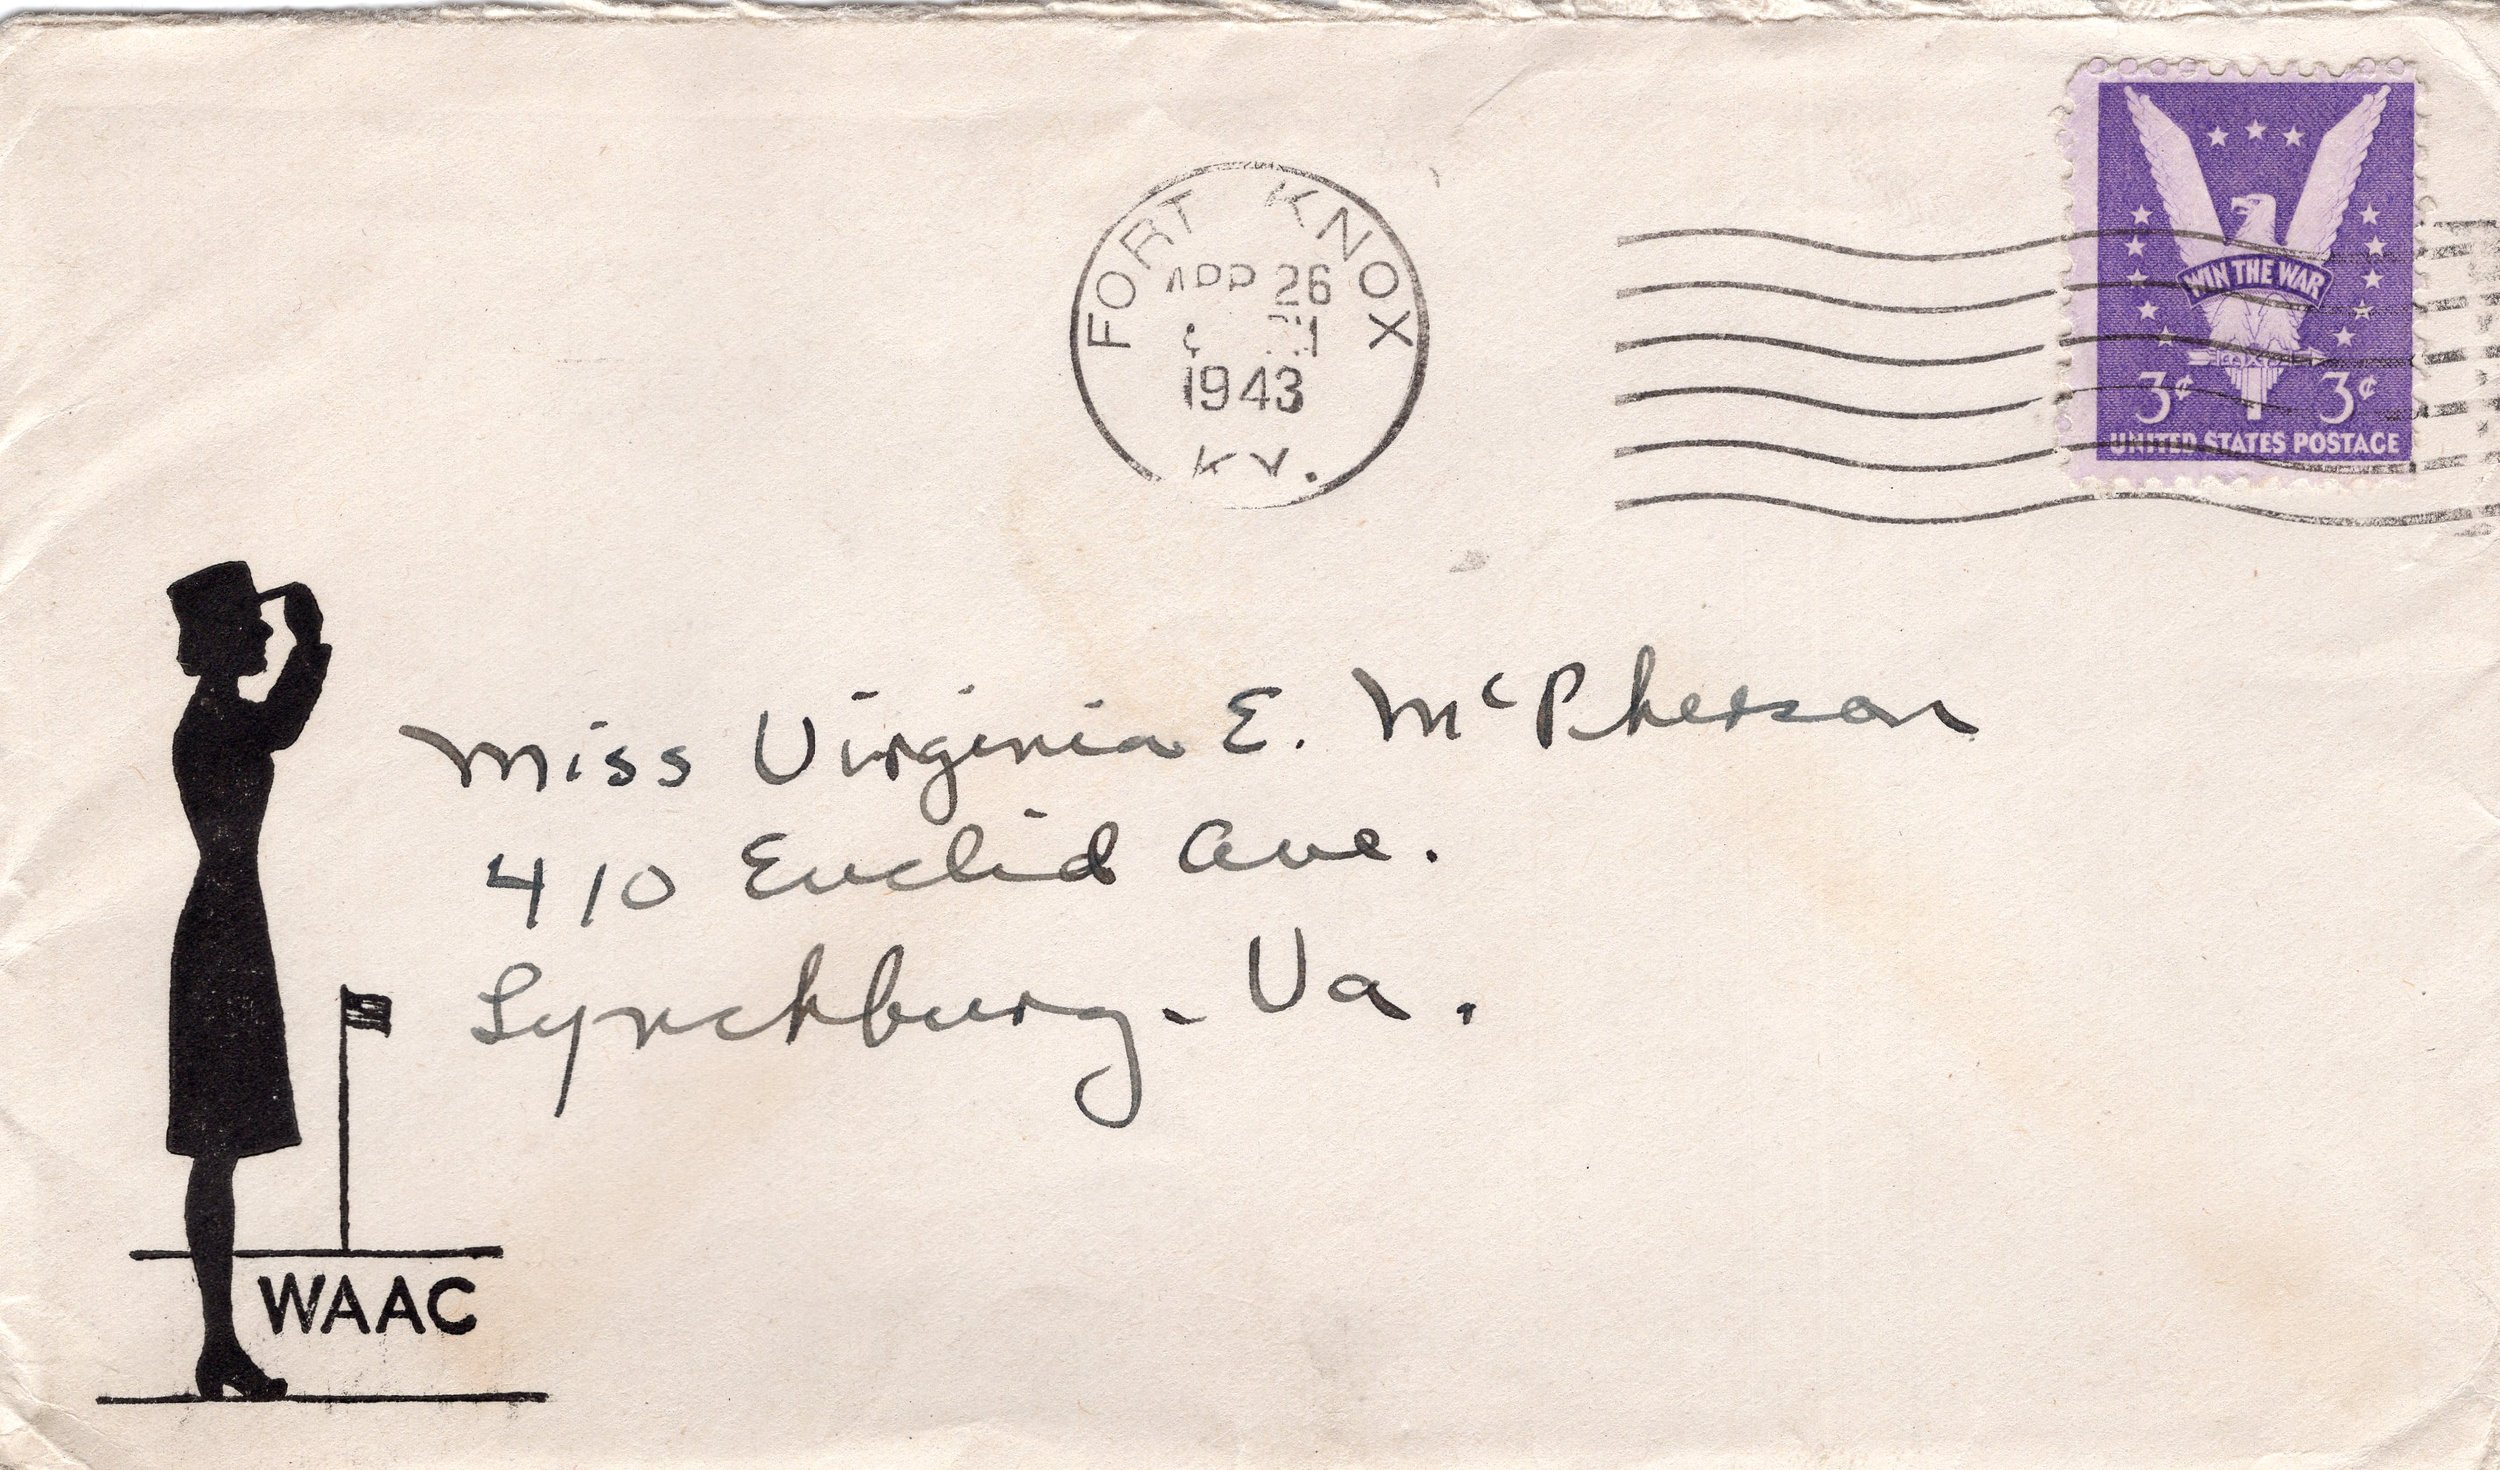   Aux Kathryn Tankersley 73rd W. A. A. C. Post Headquarters Co., A. F. S. Fort Knox, Ky.    Envelope: Postmark: Fort Knox, Ky.&nbsp; 73 301 April 26, 1943    To:&nbsp;    Miss Virginia E. McPherson 410 Euclid Ave. Lynchburg, Va.  